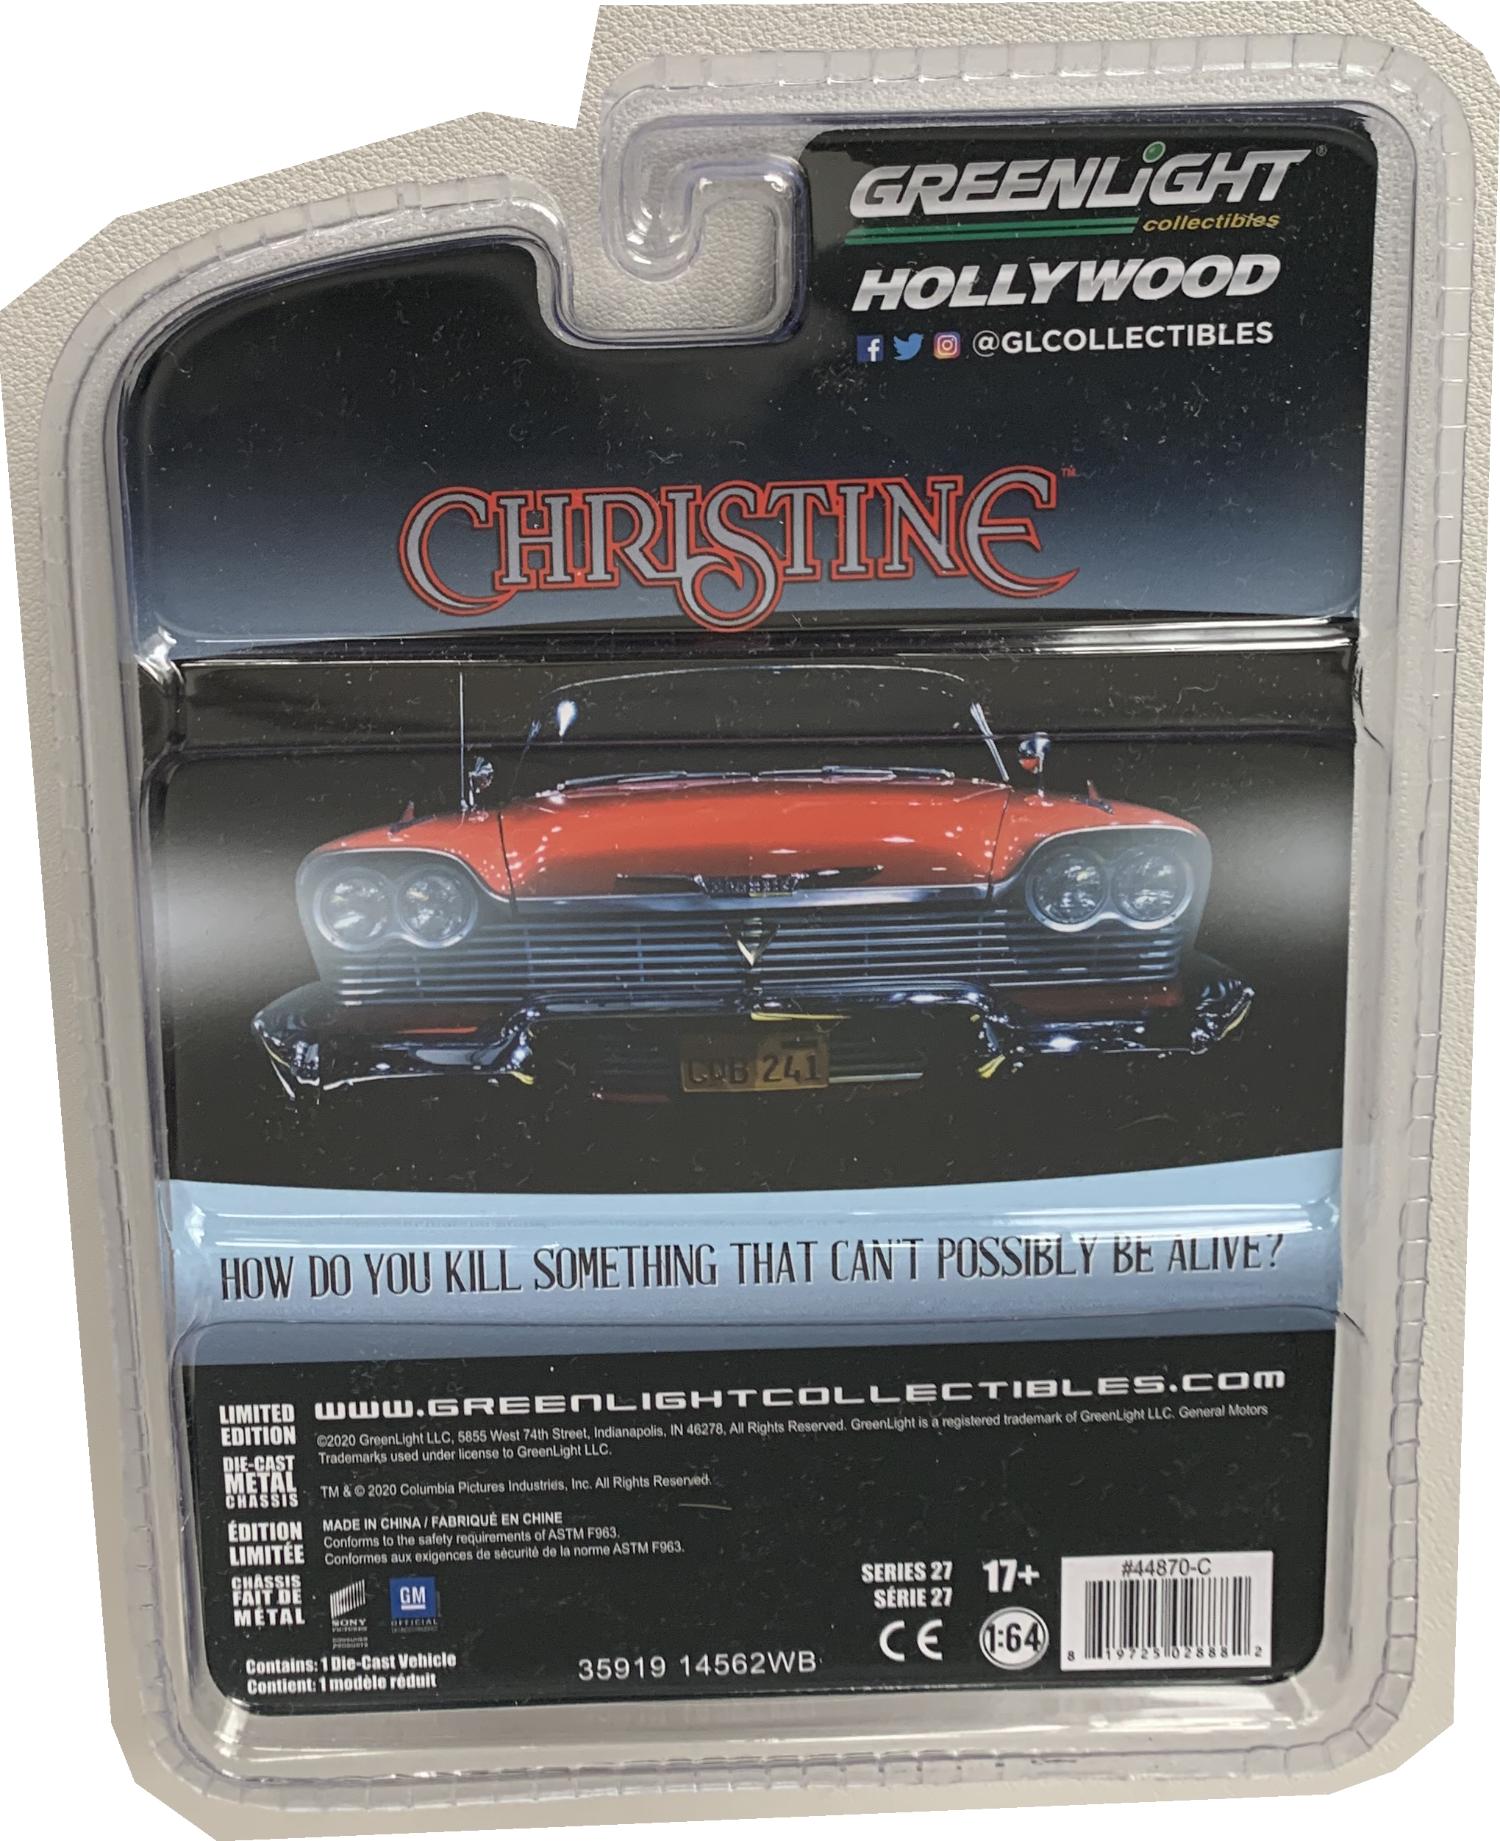 From the Film Christine, 1967 Chevrolet Camaro in metallic grey 1:64 scale model from Greenlight, limited edition